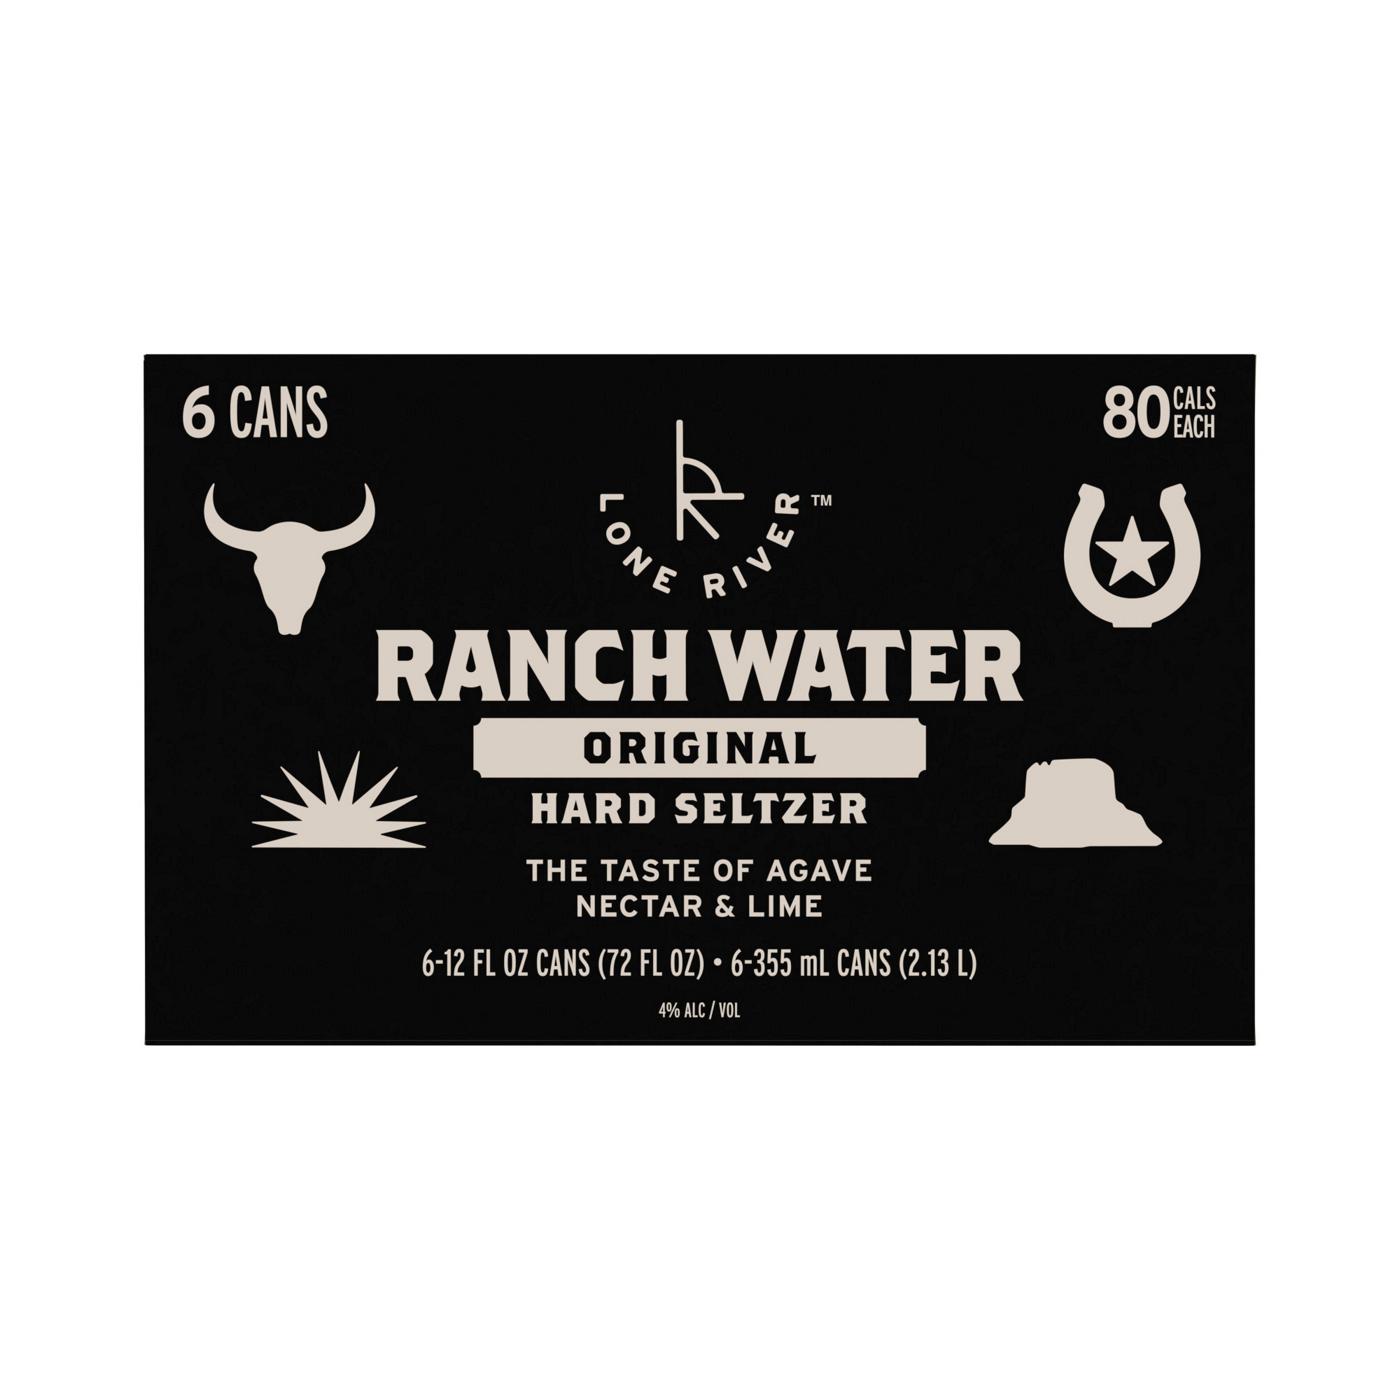 Lone River Original Ranch Water Hard Seltzer 6 pk Cans; image 2 of 4